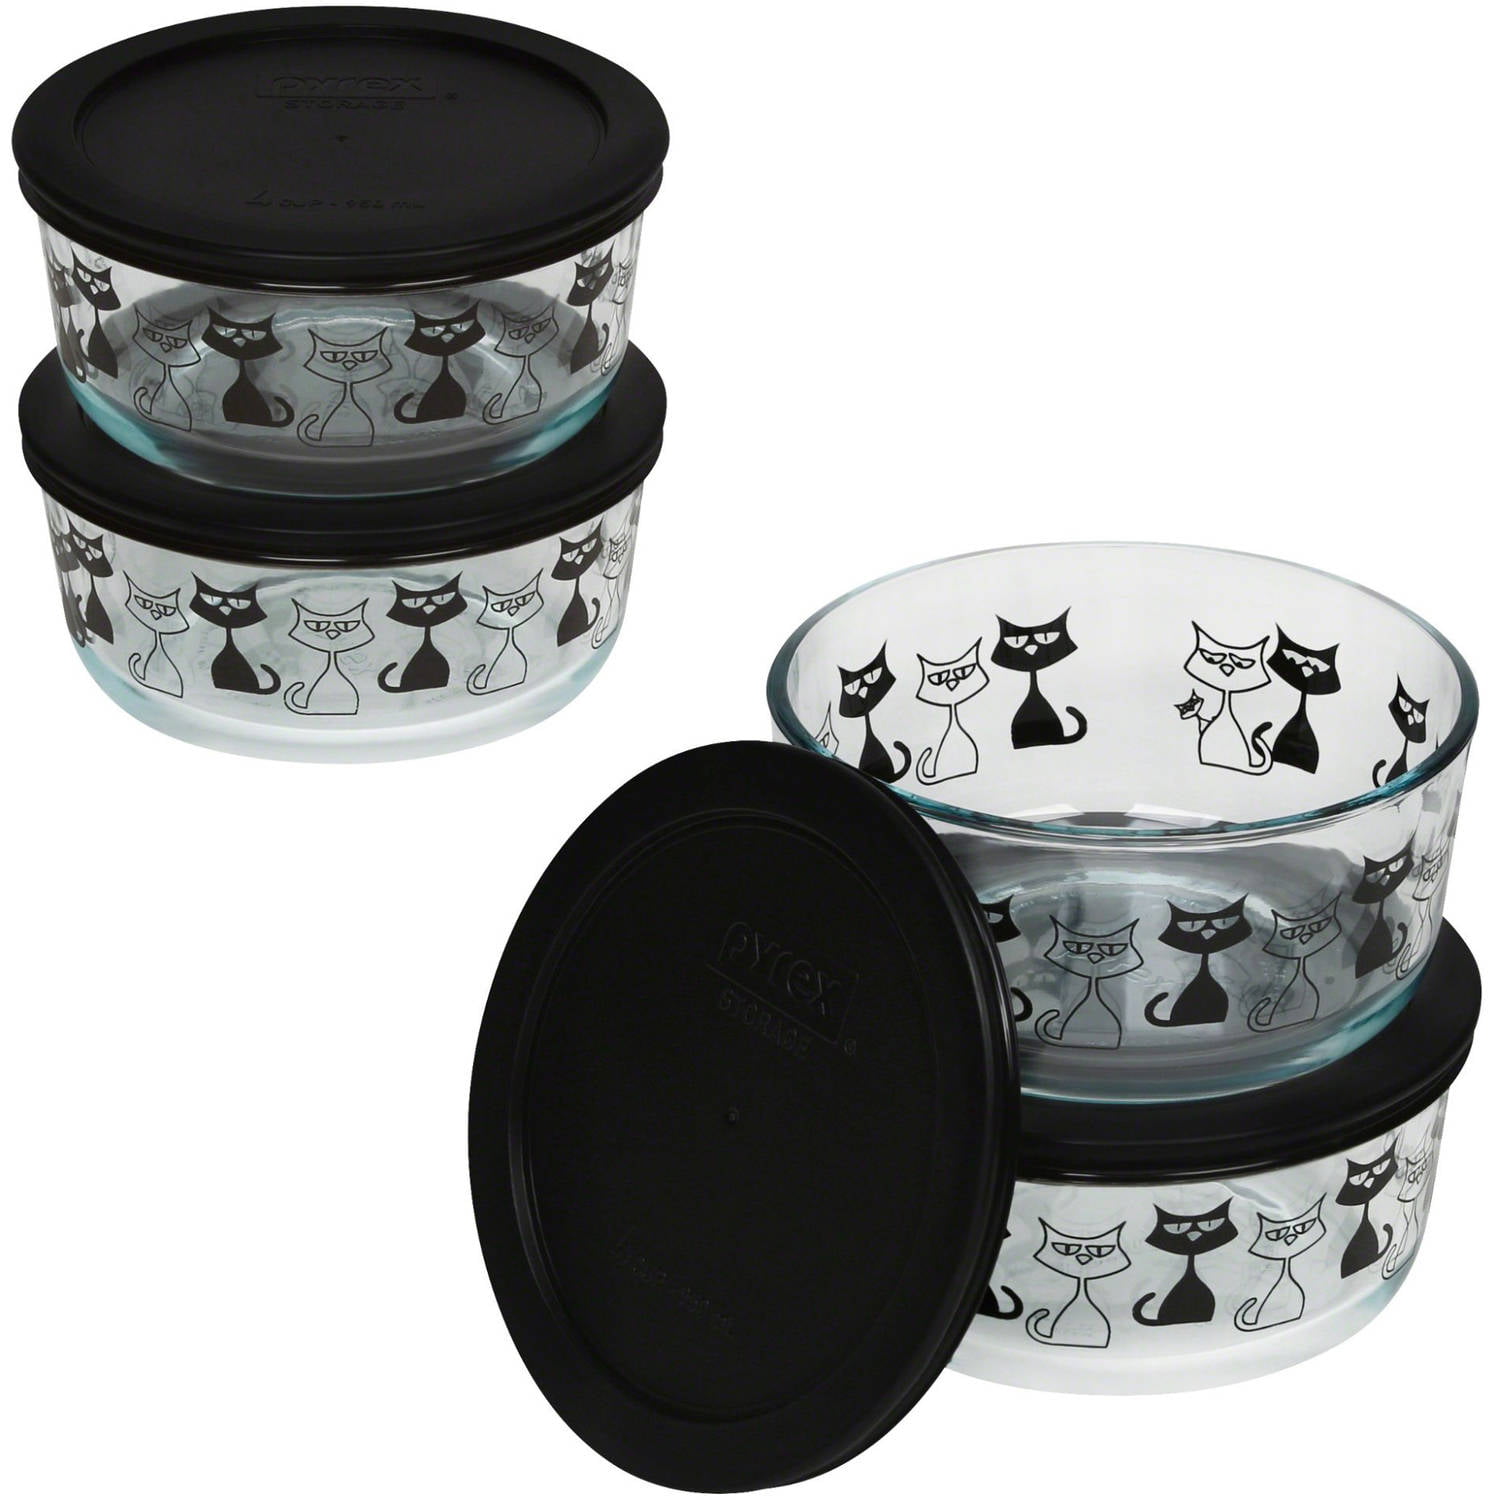 Tupperware New Black Halloween Nesting Containers With Lids 6 Piece